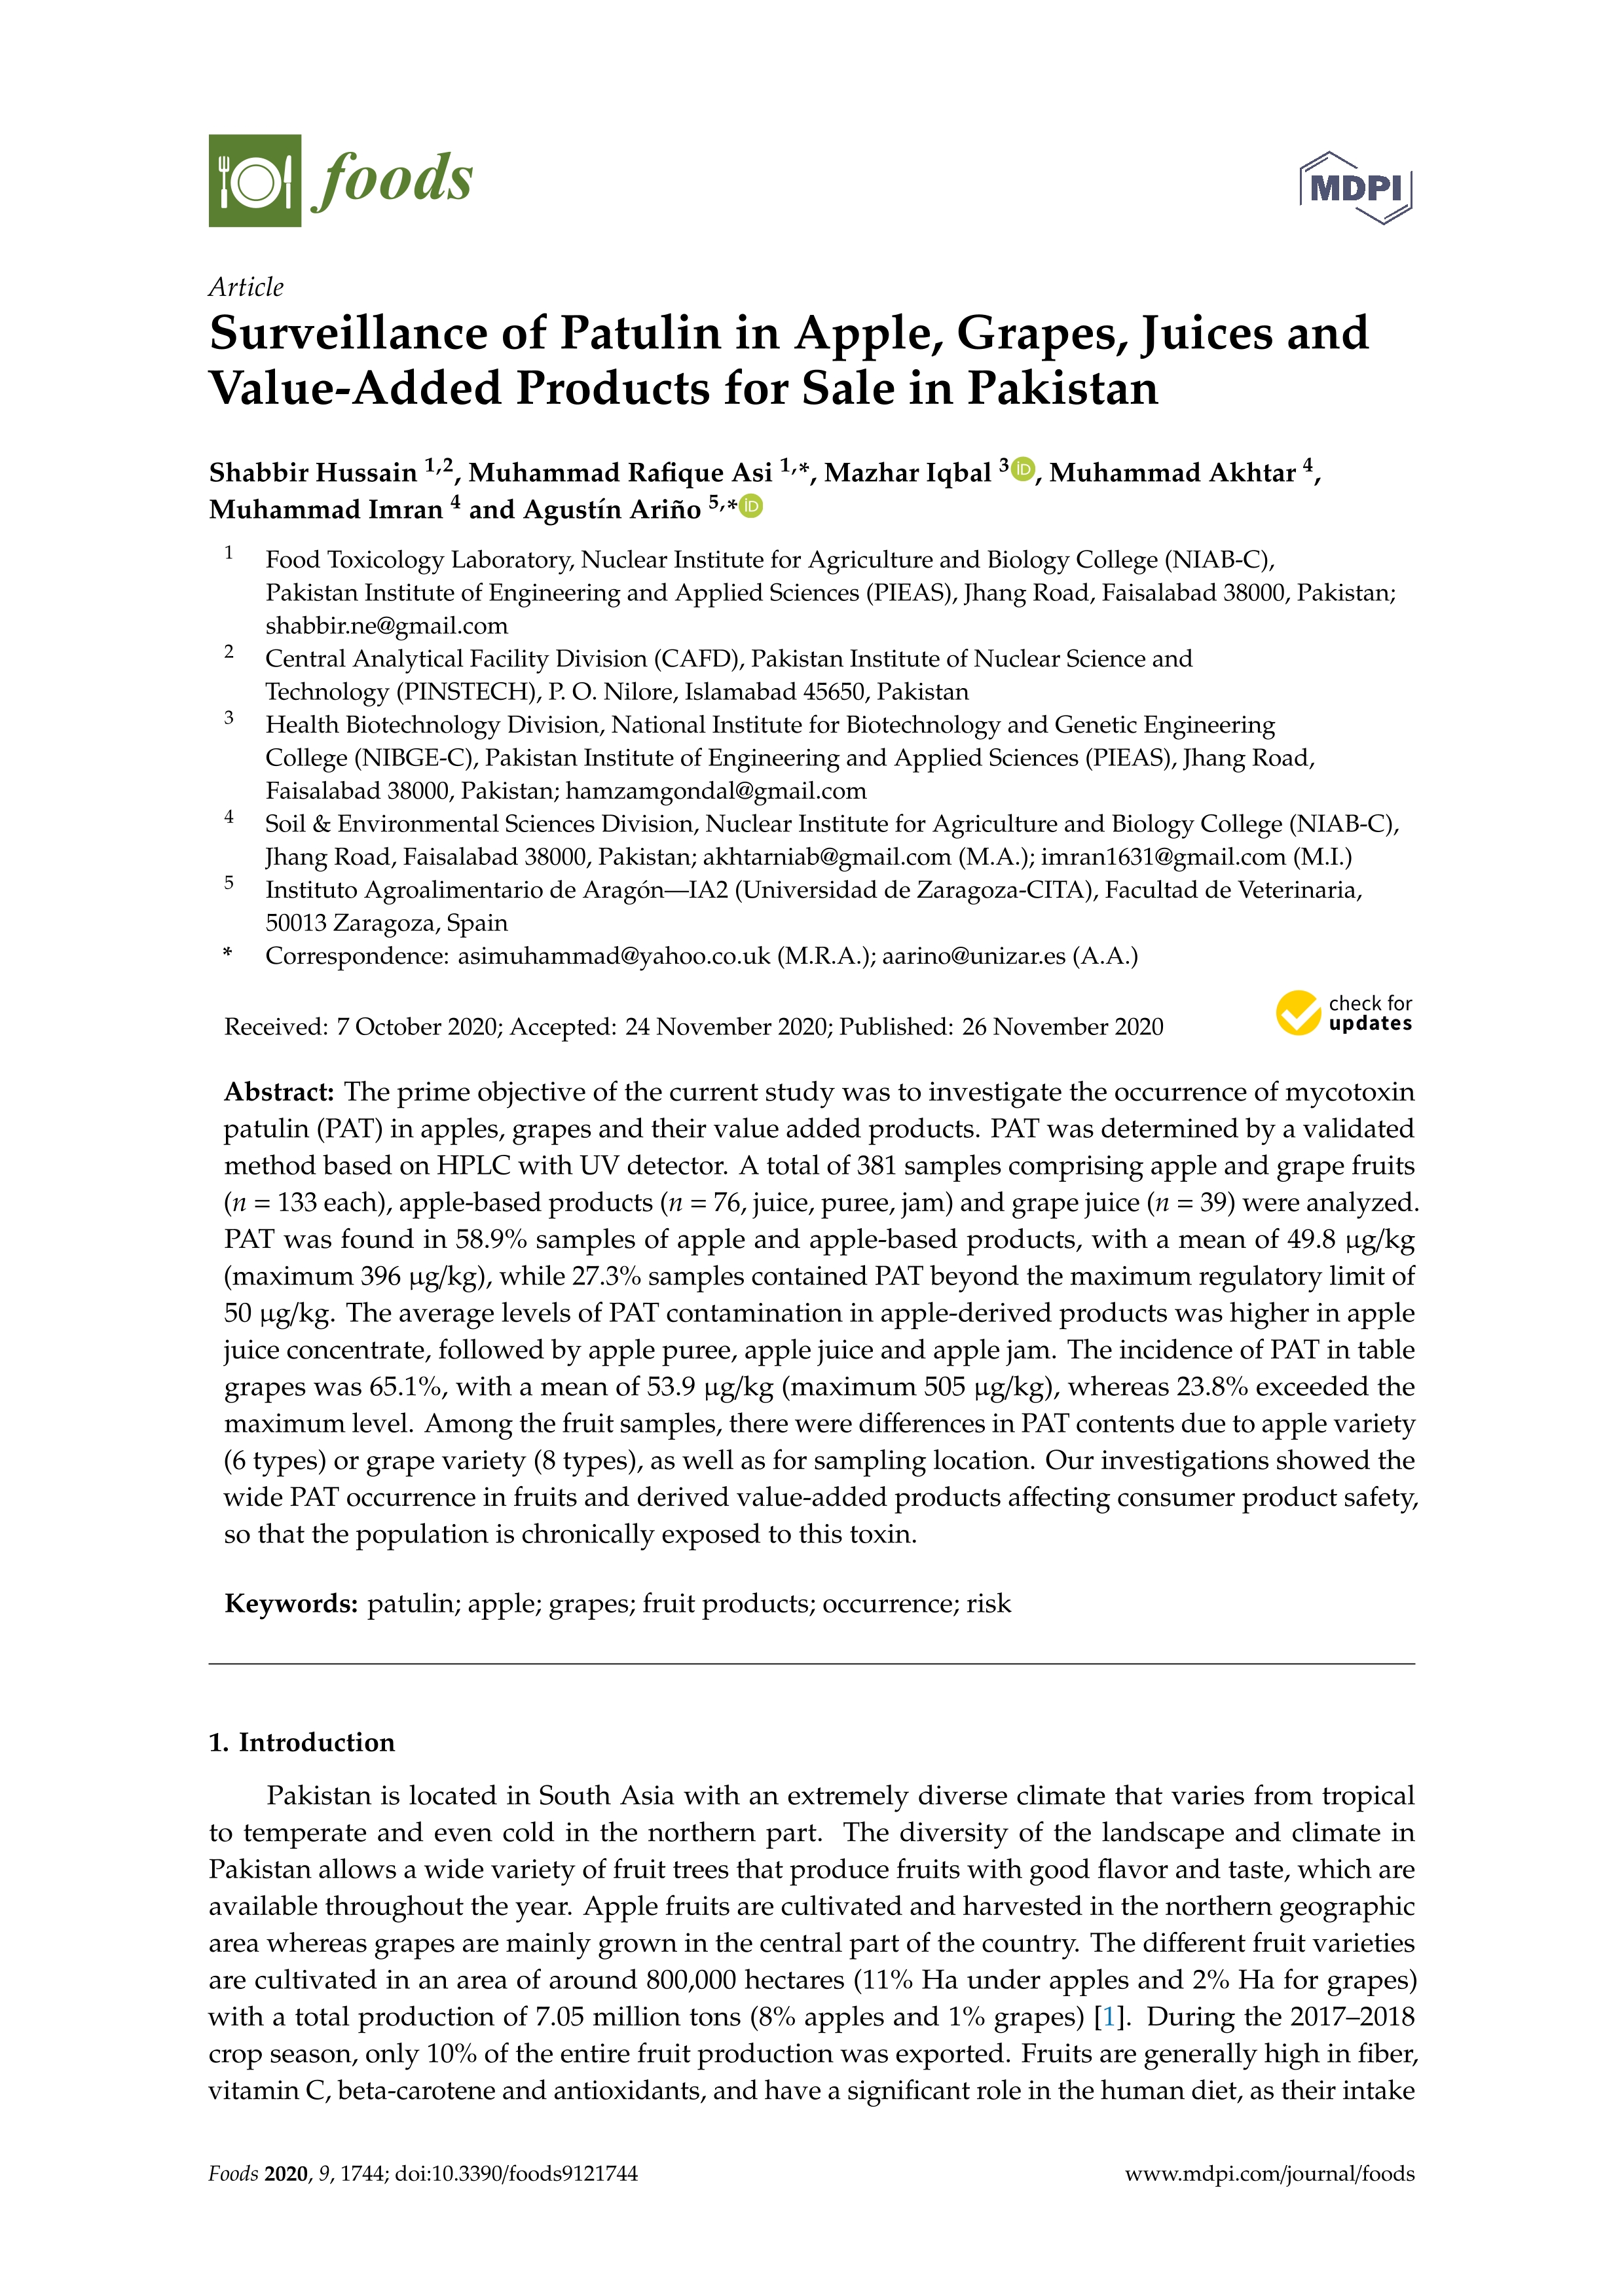 Surveillance of patulin in apple, grapes, juices and value-added products for sale in Pakistan